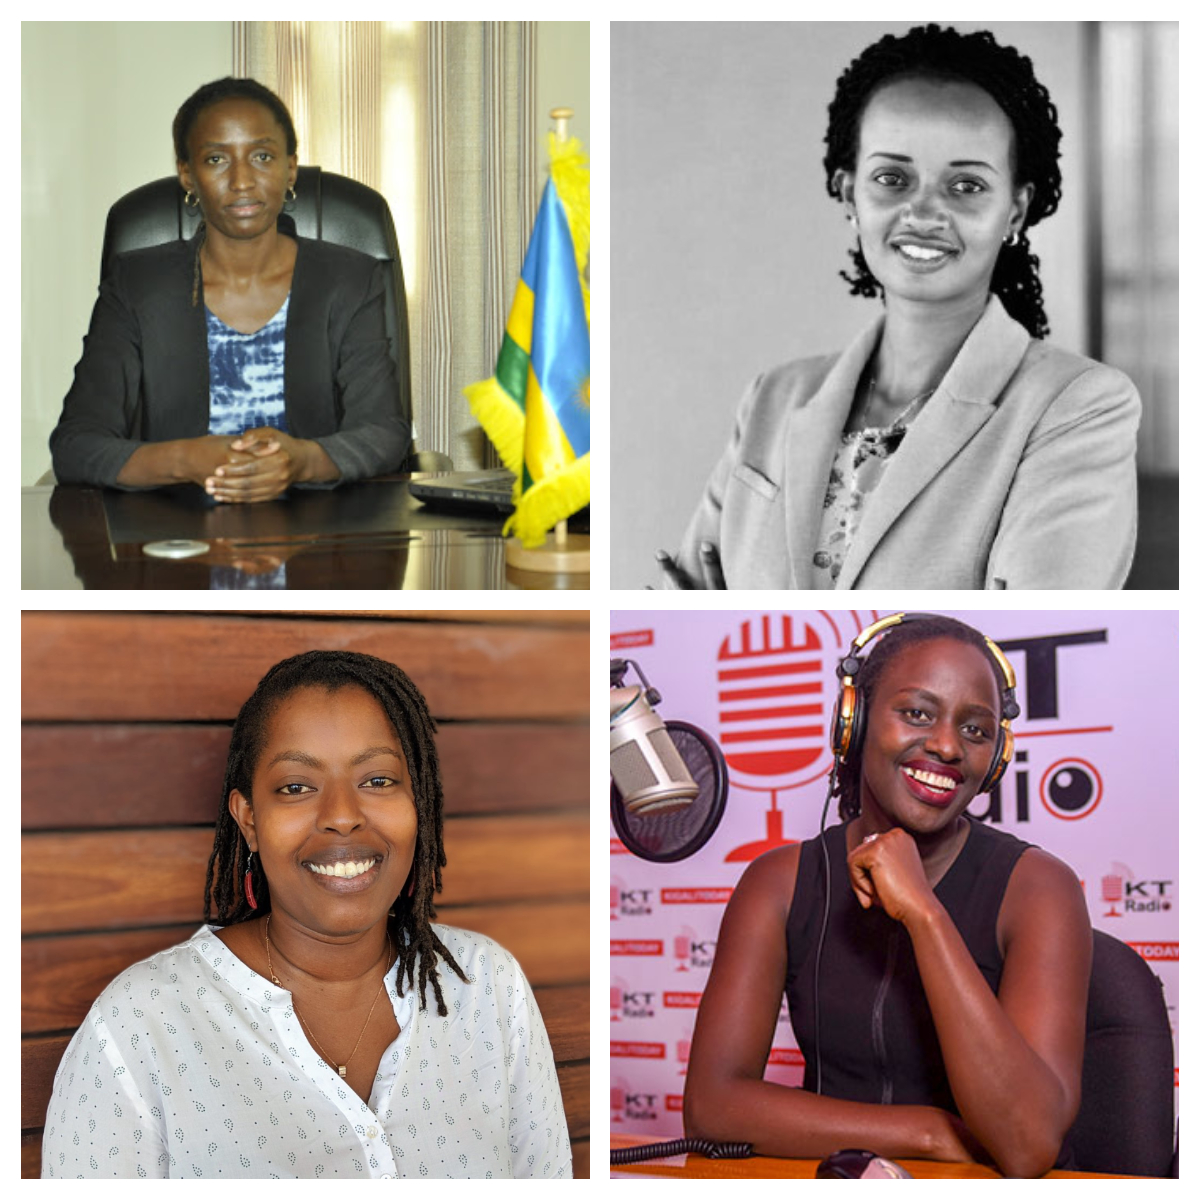 EdTech Monday is Back! “Enabling Young Women’s Leadership in EdTech”